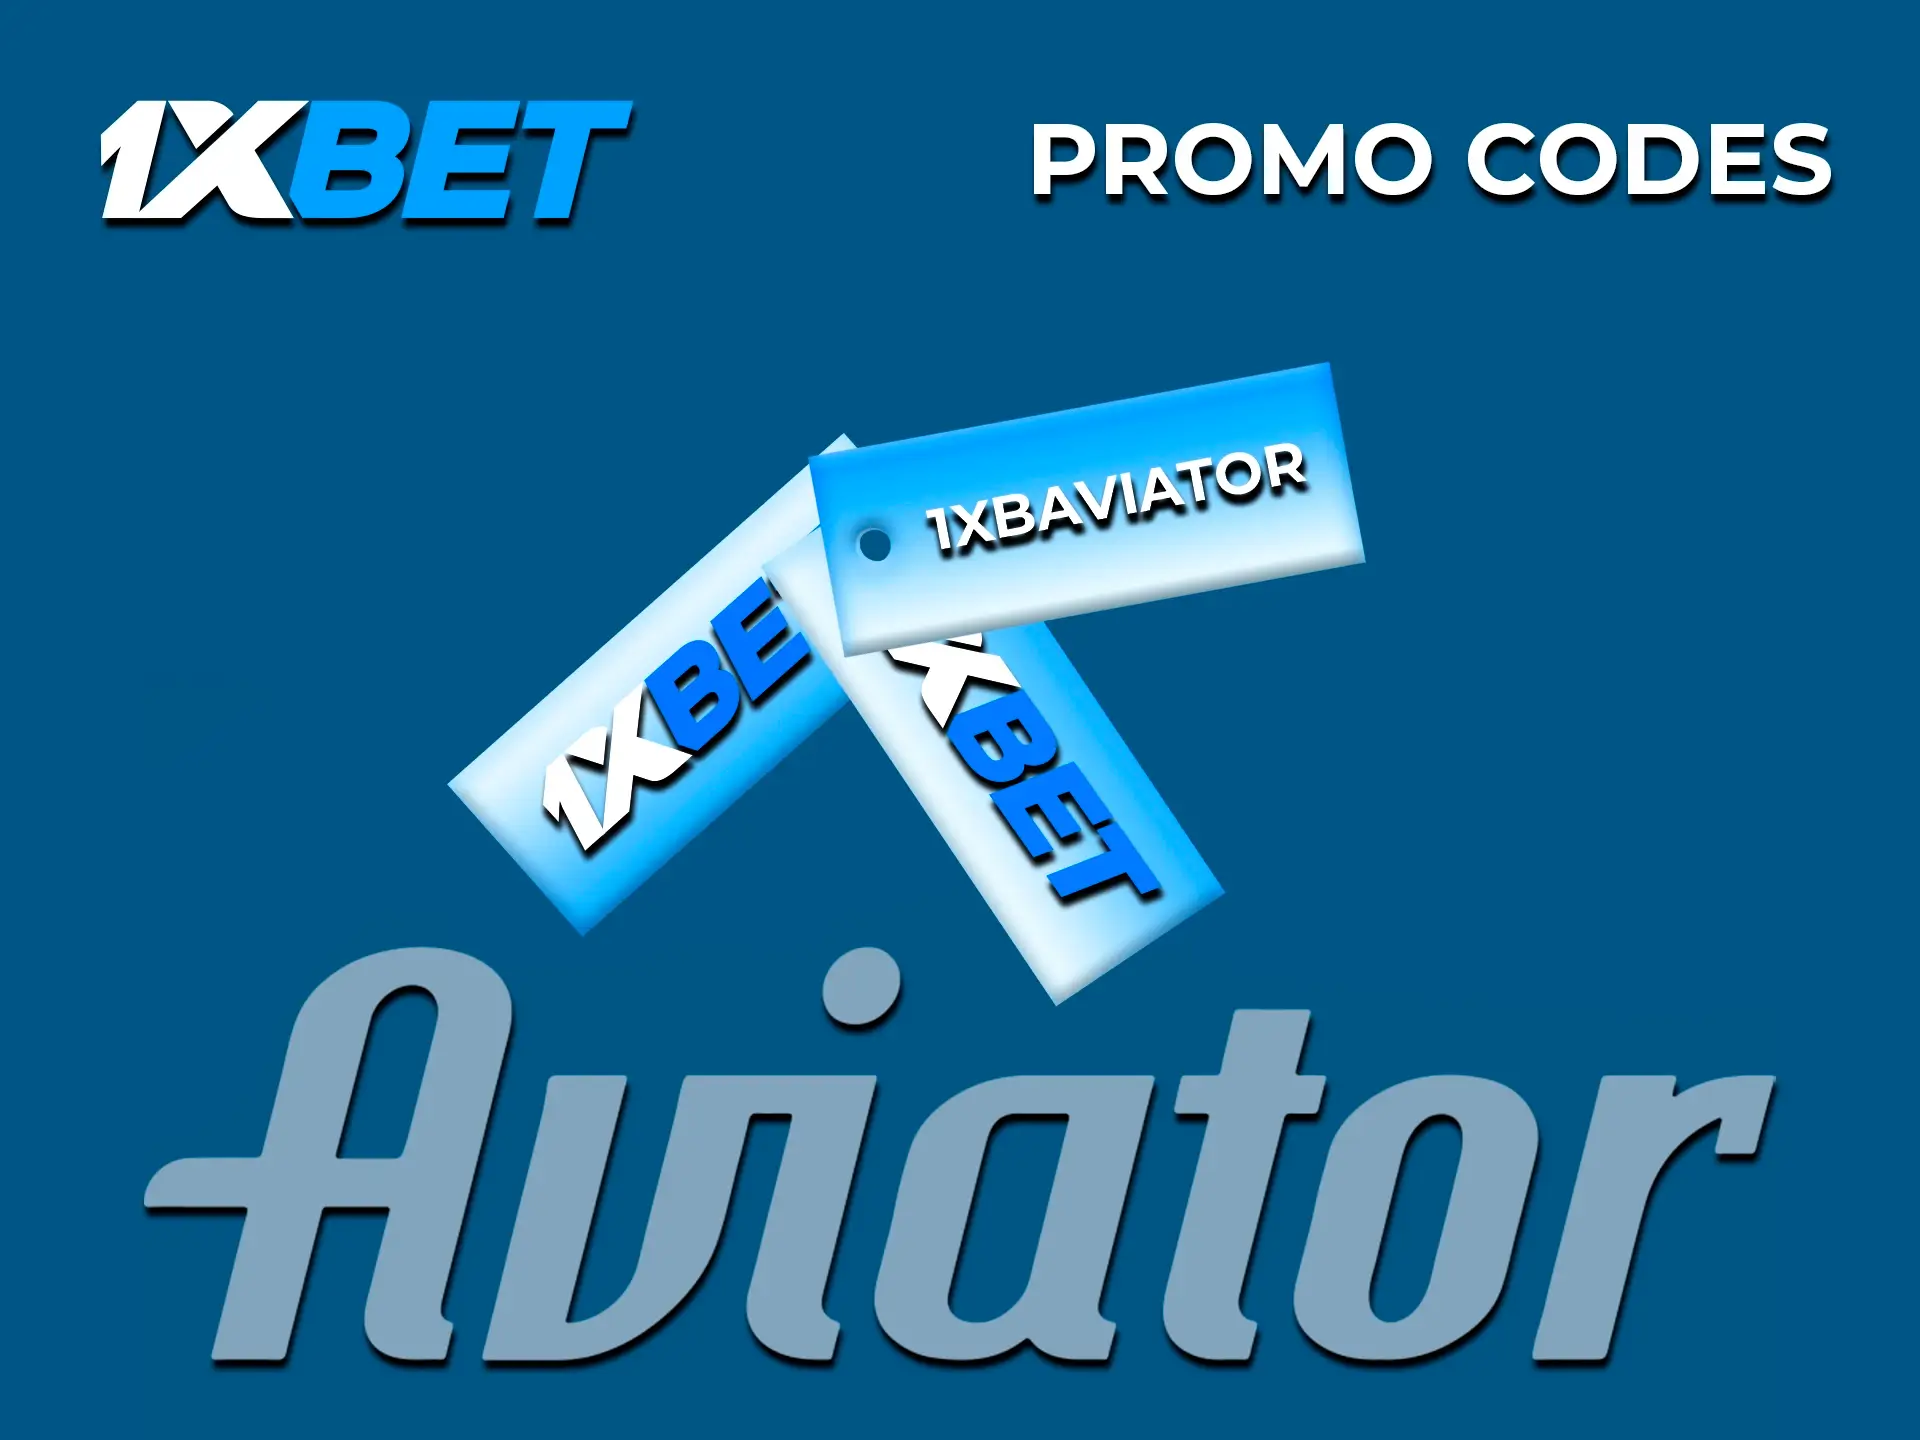 Don't miss this unique opportunity to use Aviator promo codes from 1xBet.